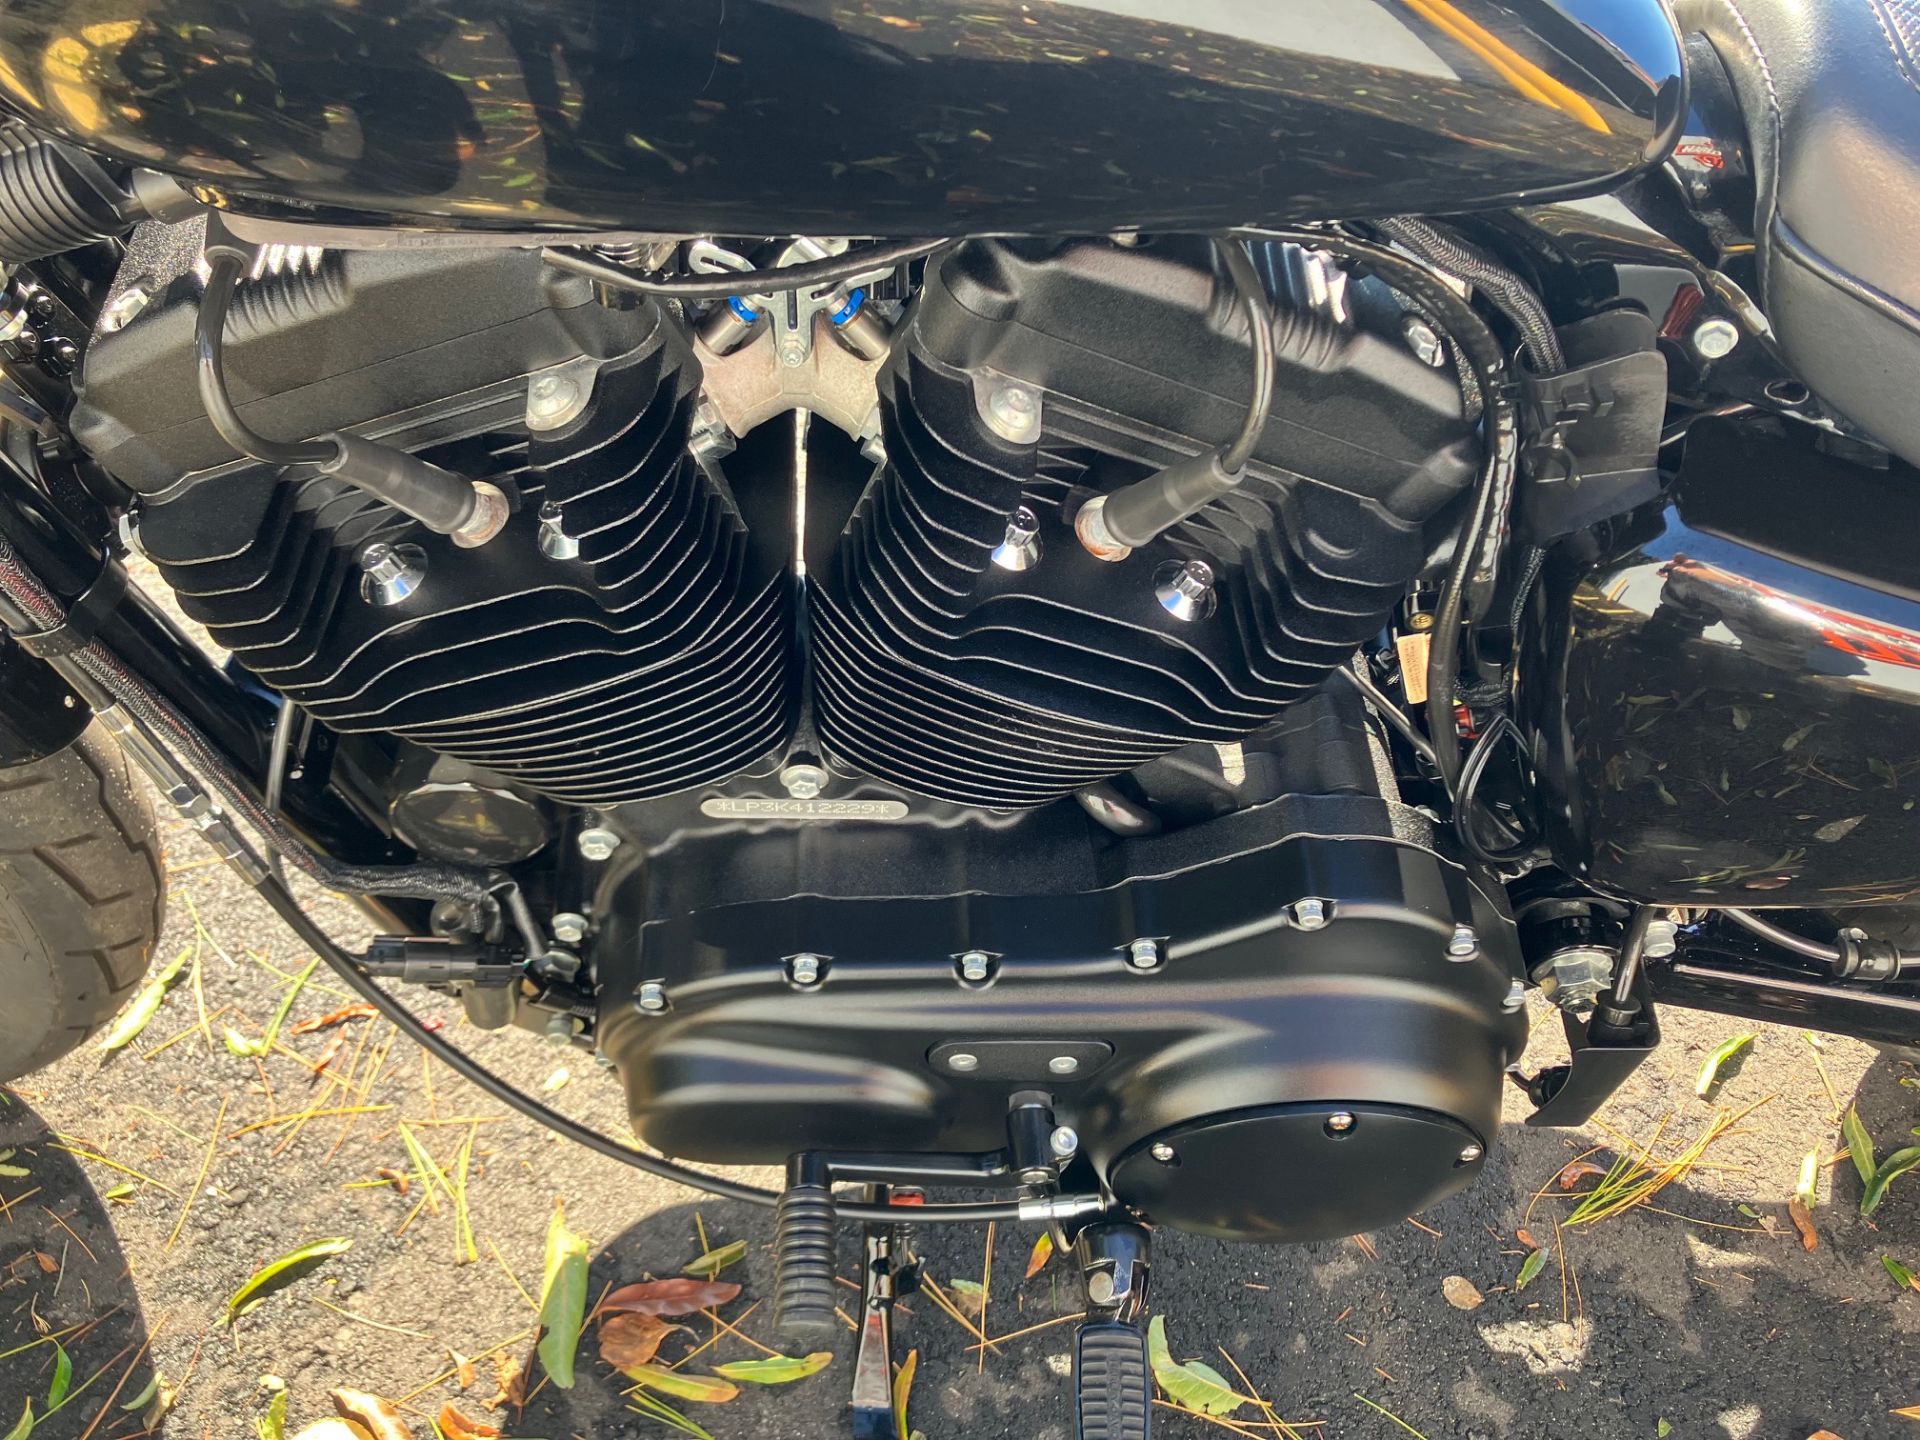 2019 Harley-Davidson IRON 1200 in West Long Branch, New Jersey - Photo 8